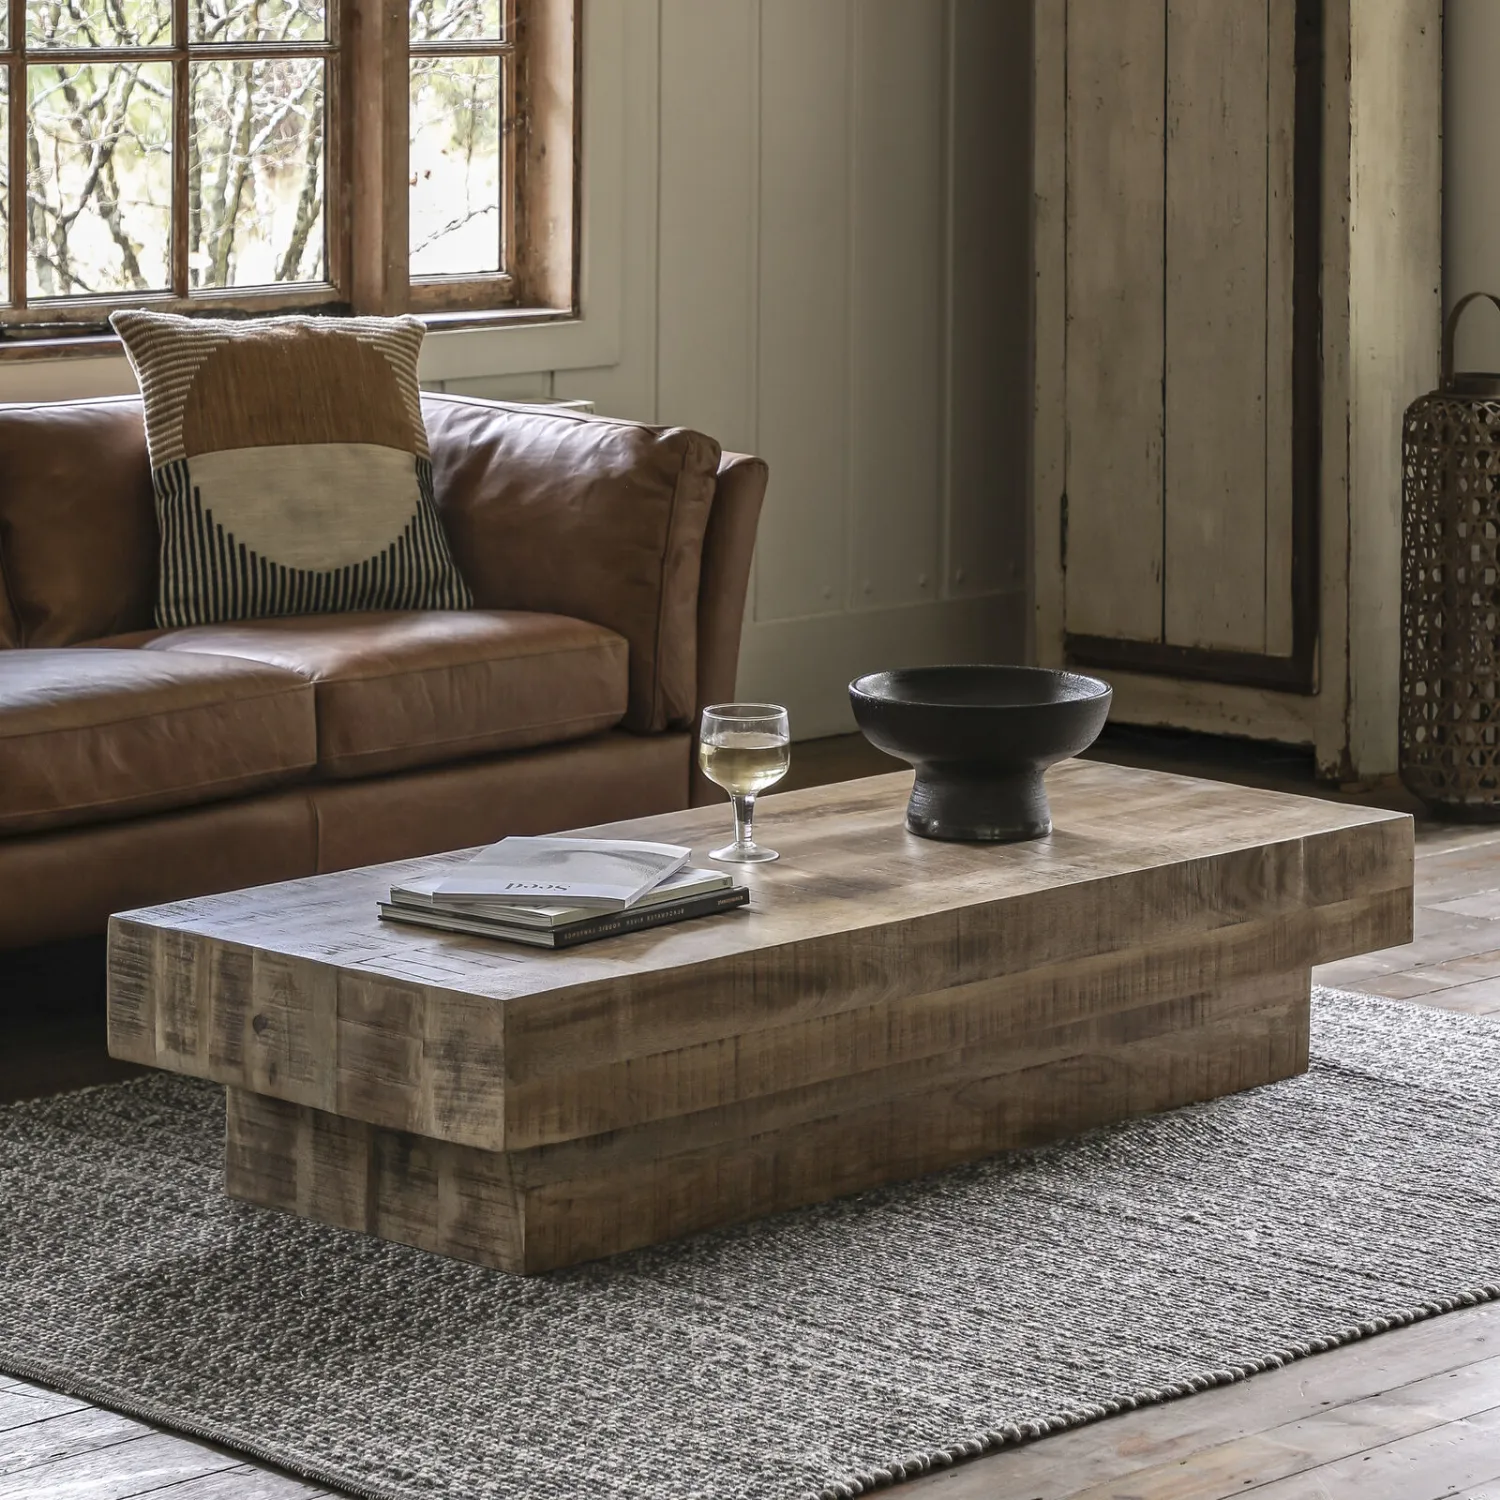 Rustic Natural Wood Solid Block Low Coffee Table